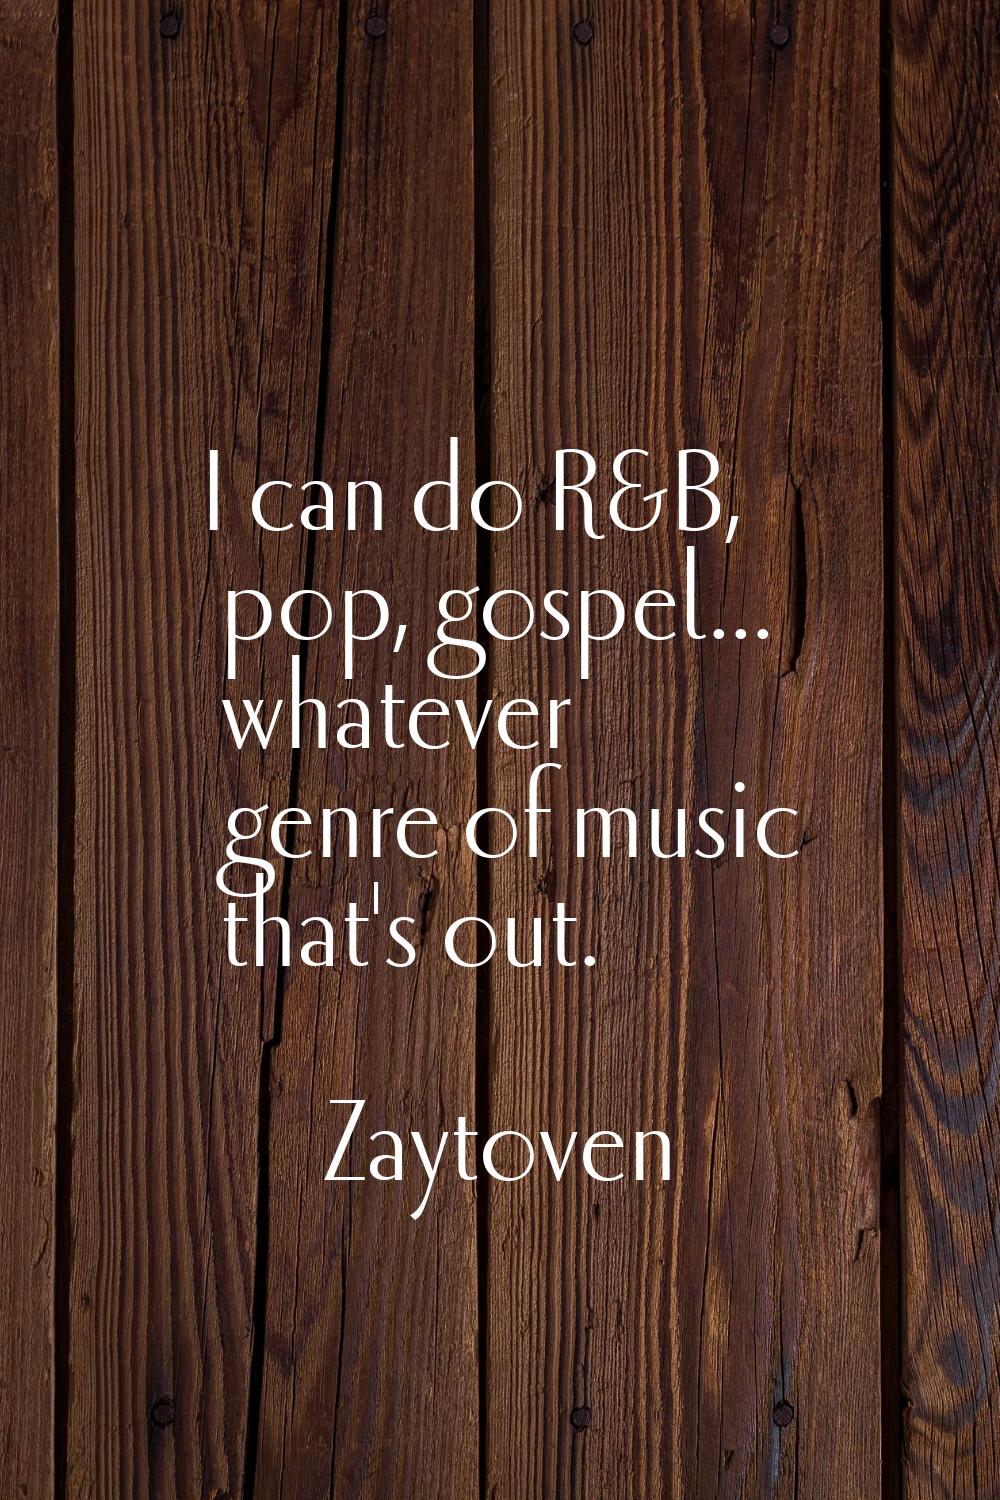 I can do R&B, pop, gospel... whatever genre of music that's out.